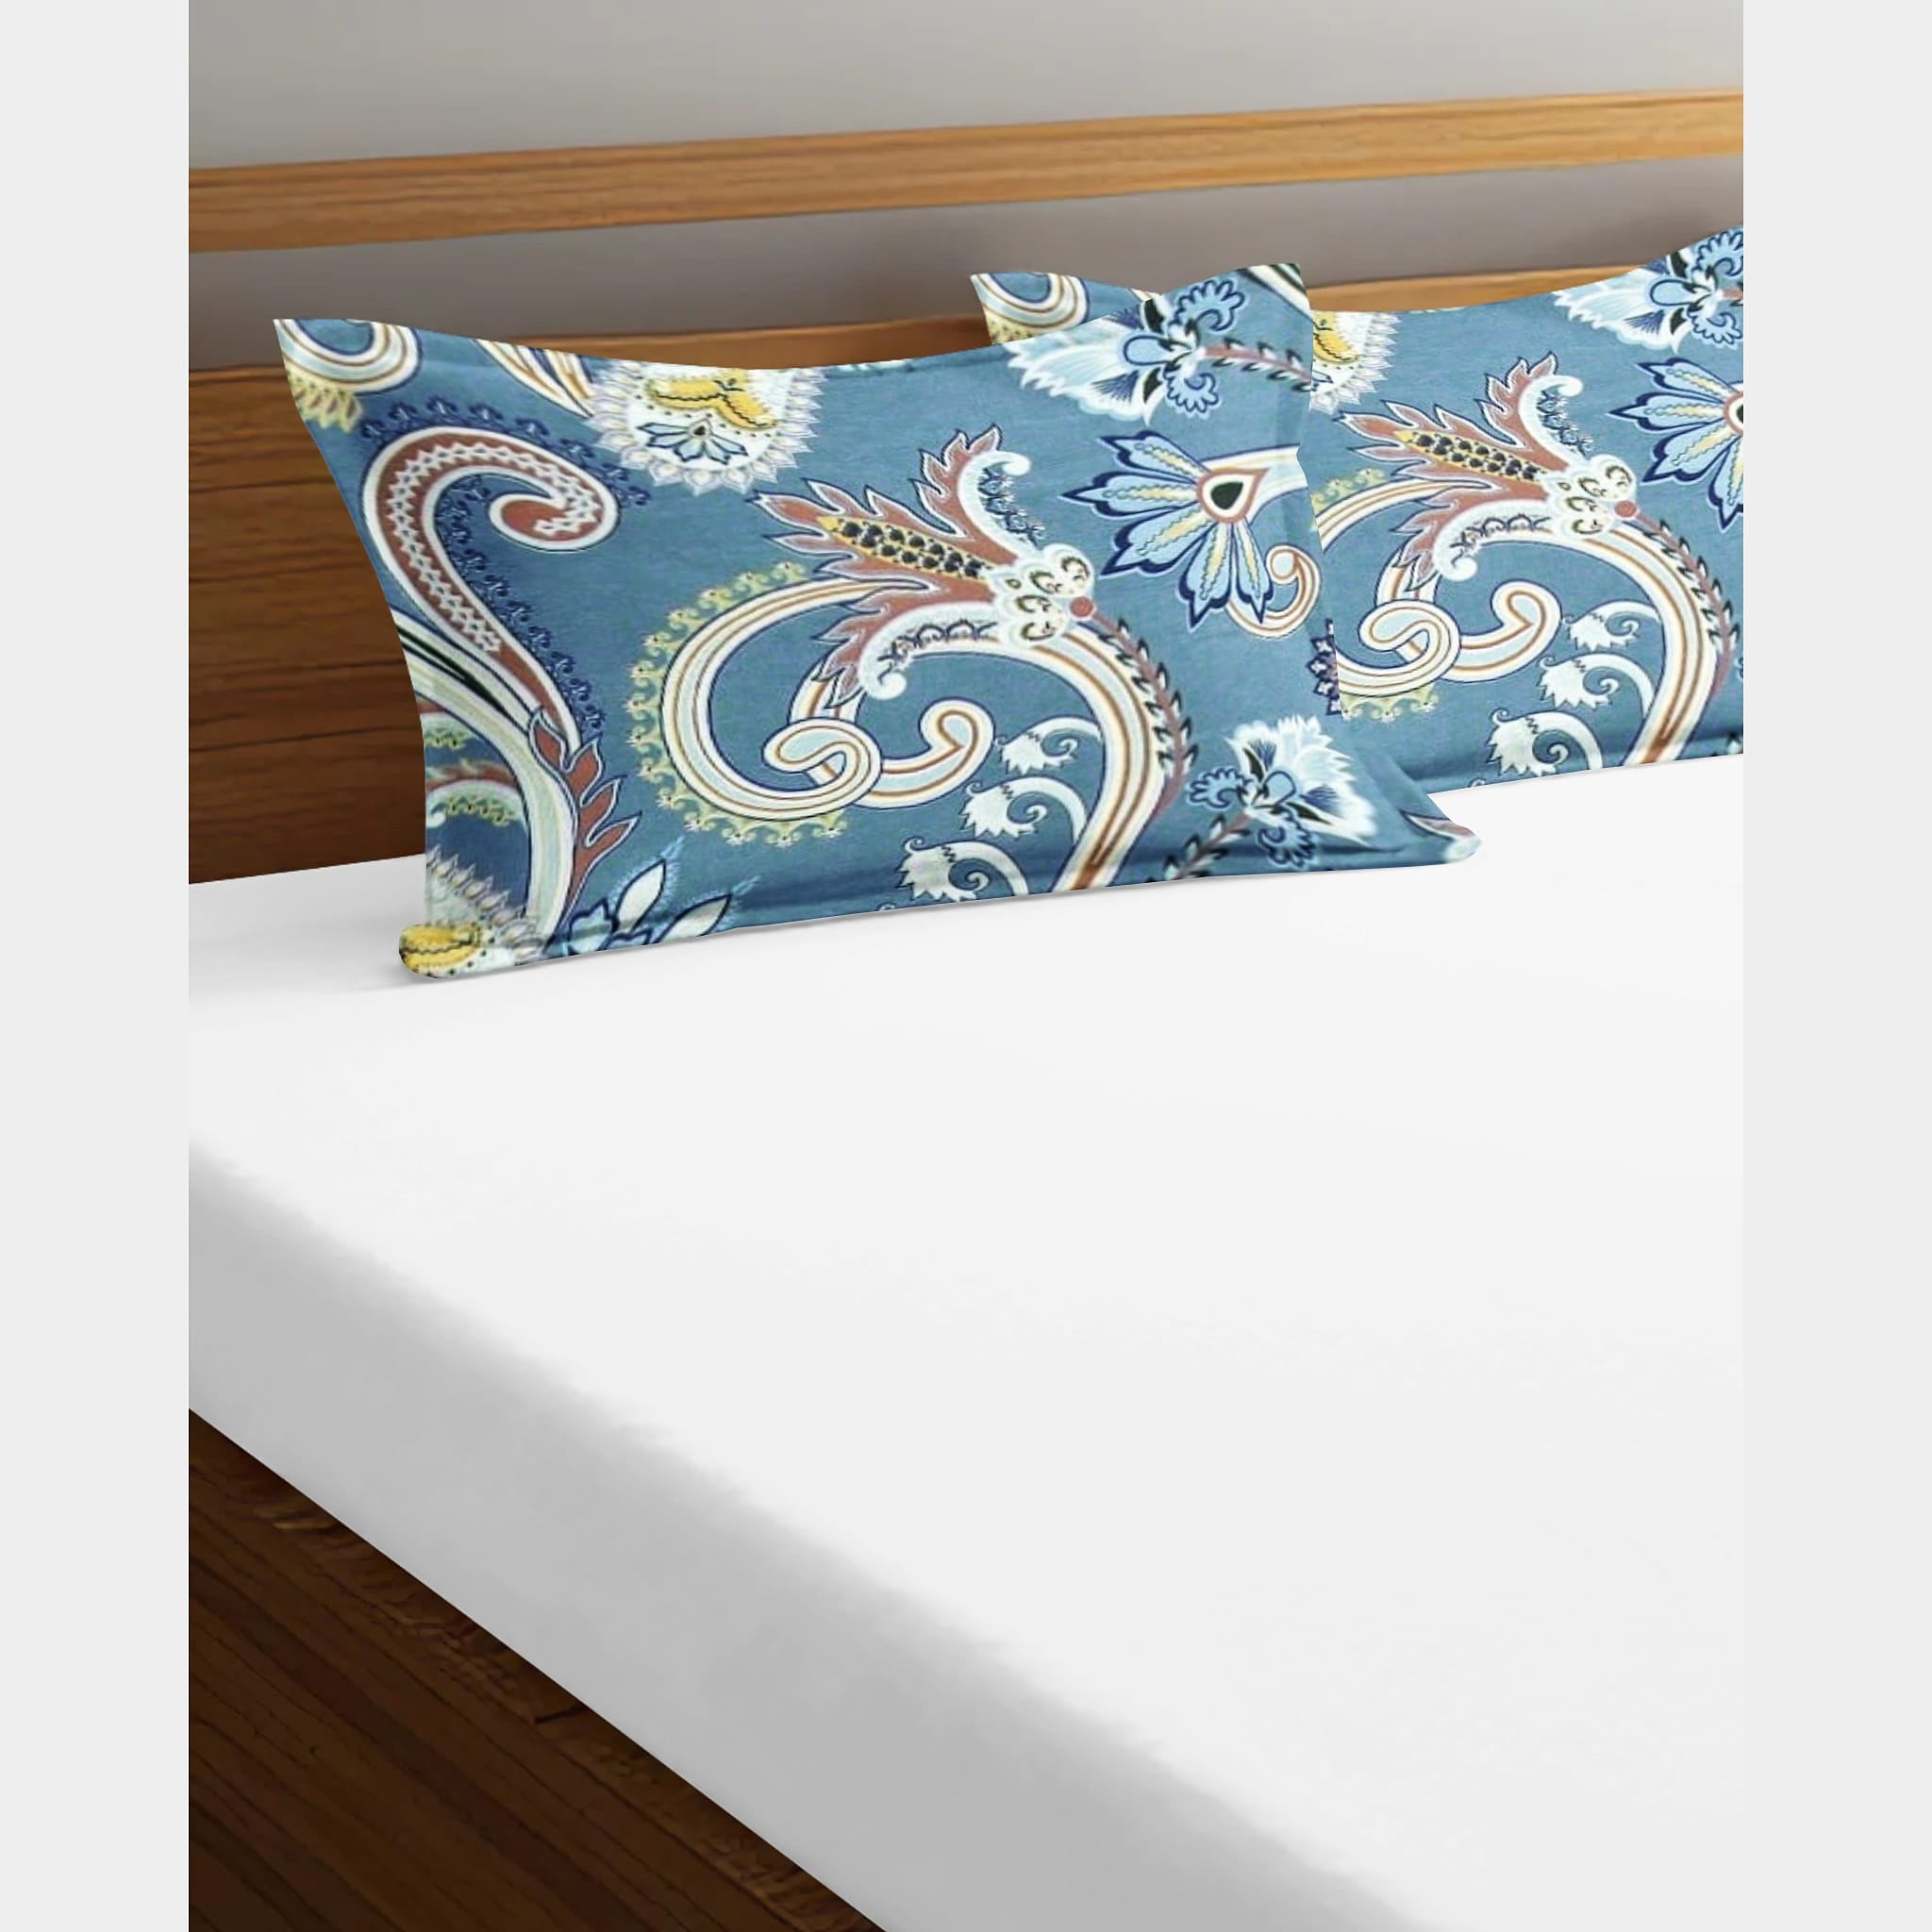 Printed Floral Set of 2 Pcs Pillow Cover - Blue